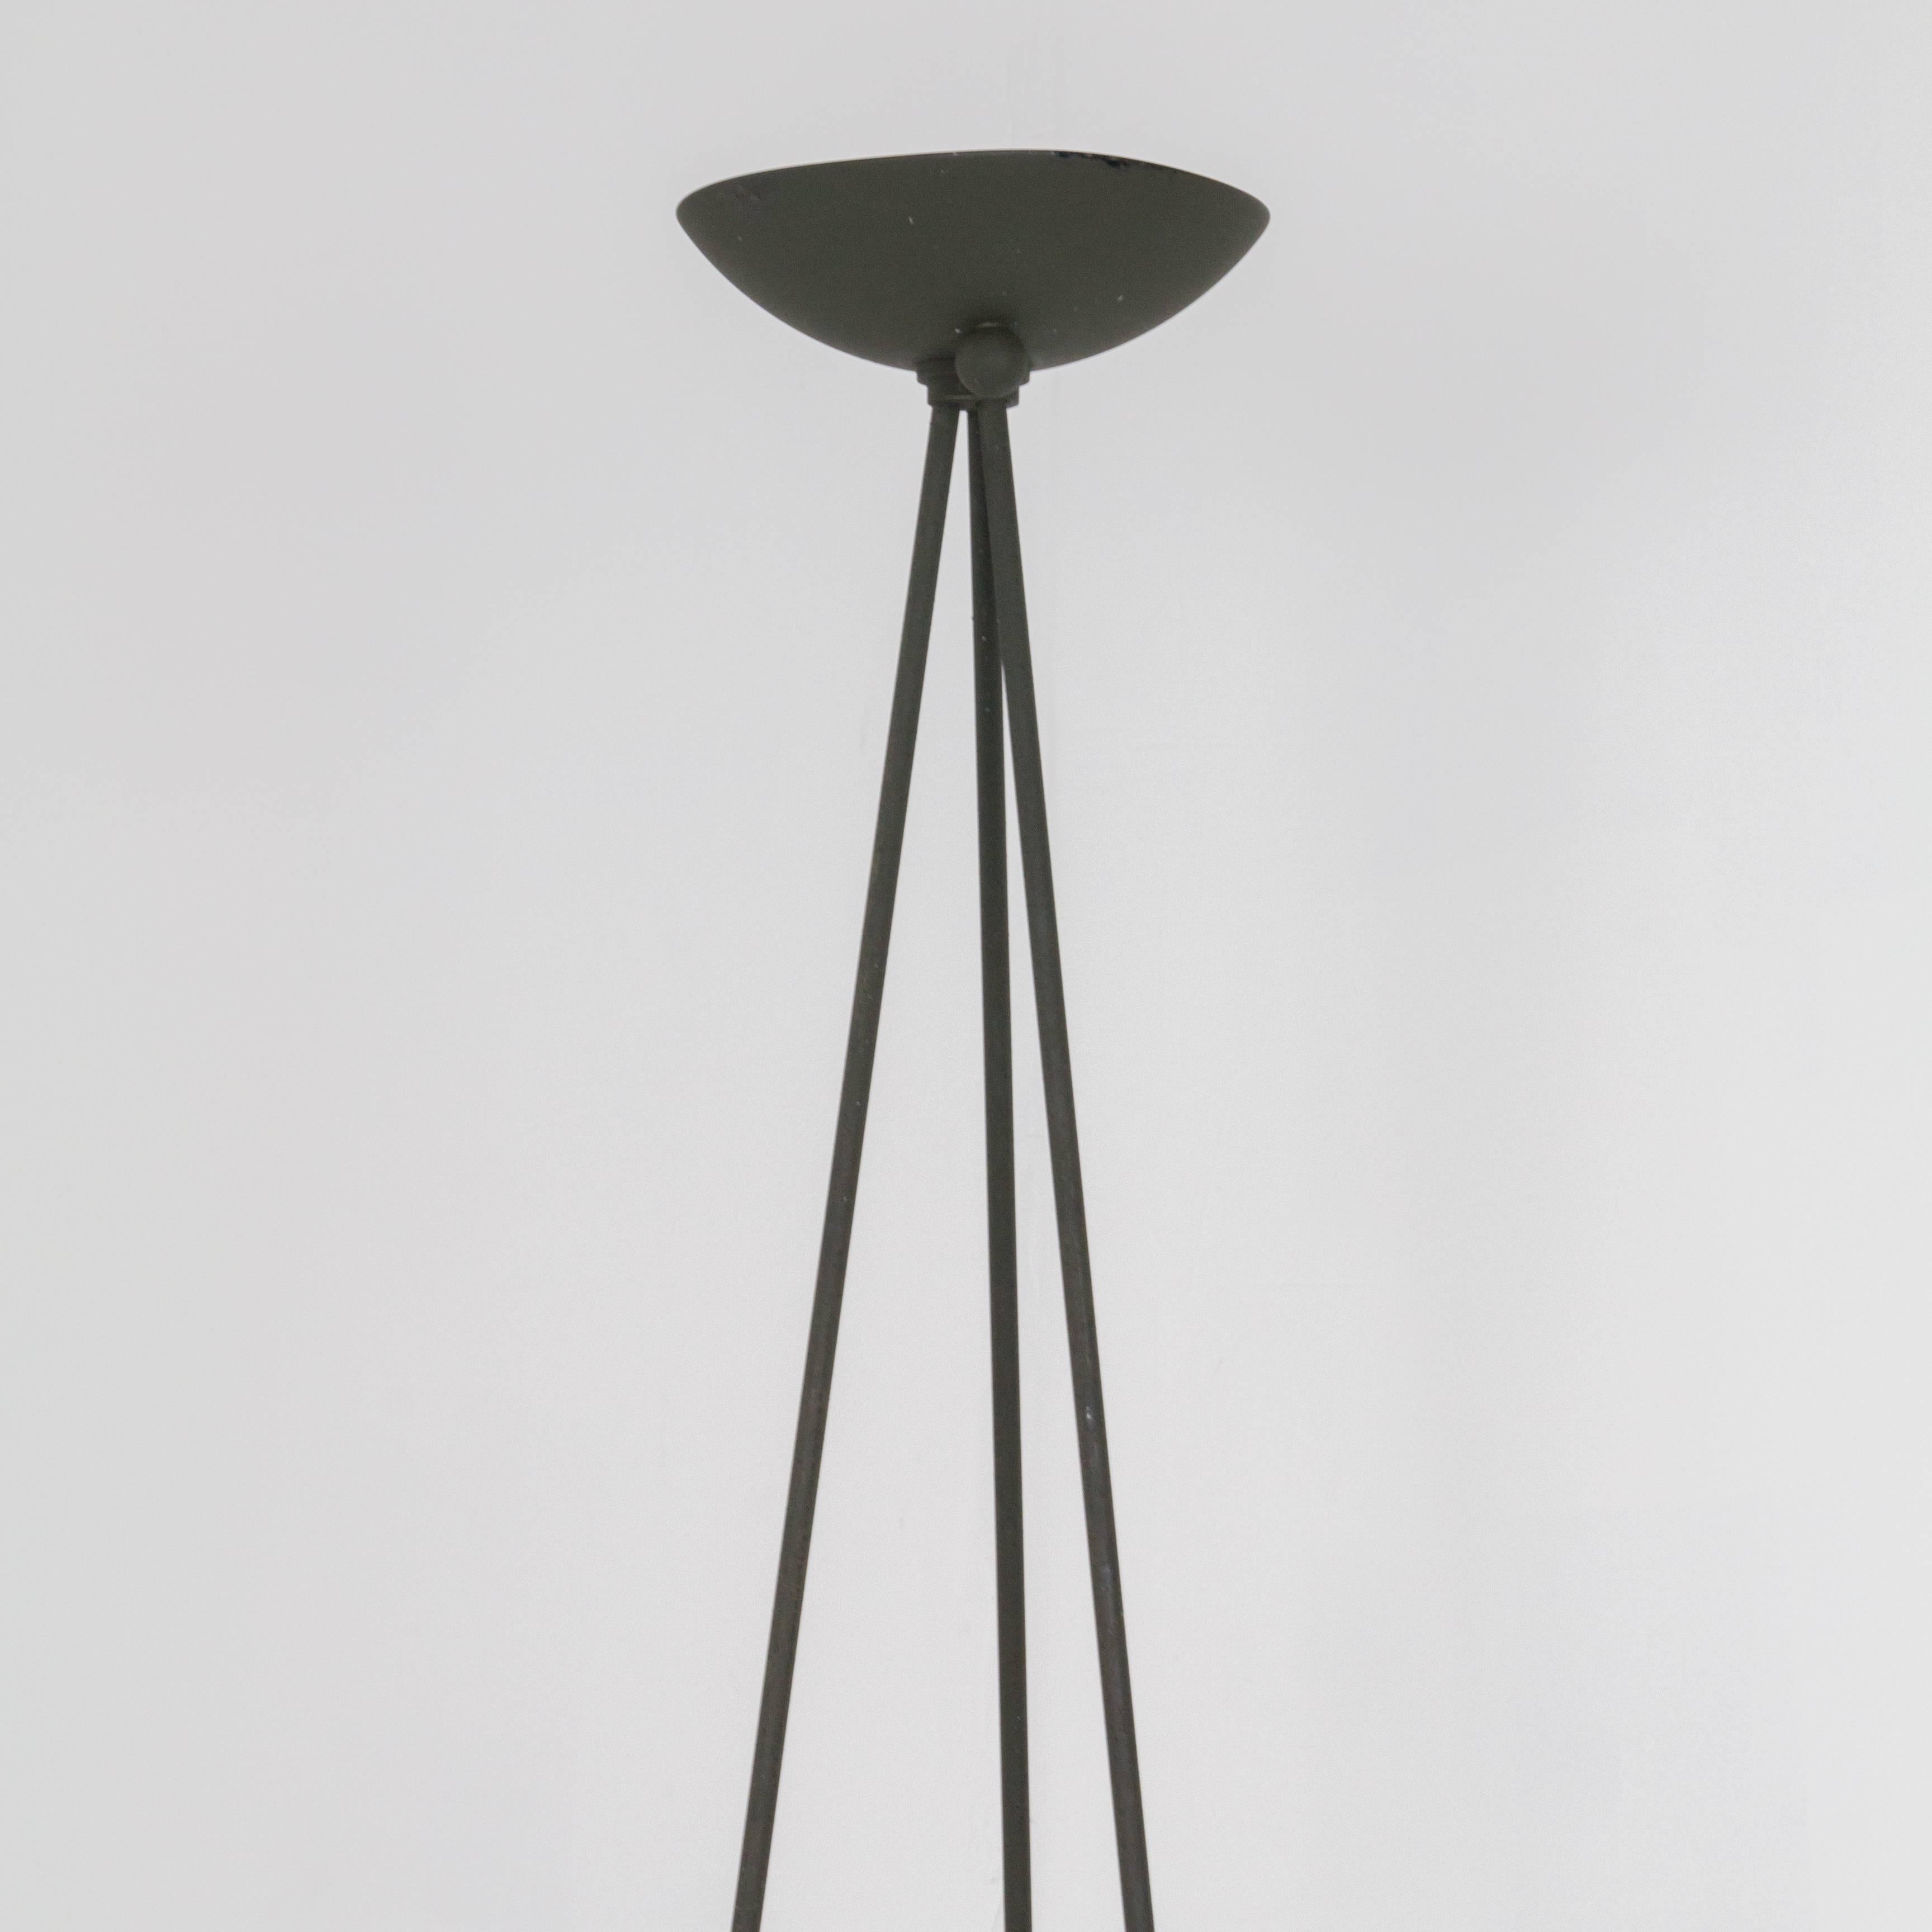 Footsteps torchiere by Piotr Sierakowski for Koch & Lowy in matte finished metal with tripod base and oversized dome feet.